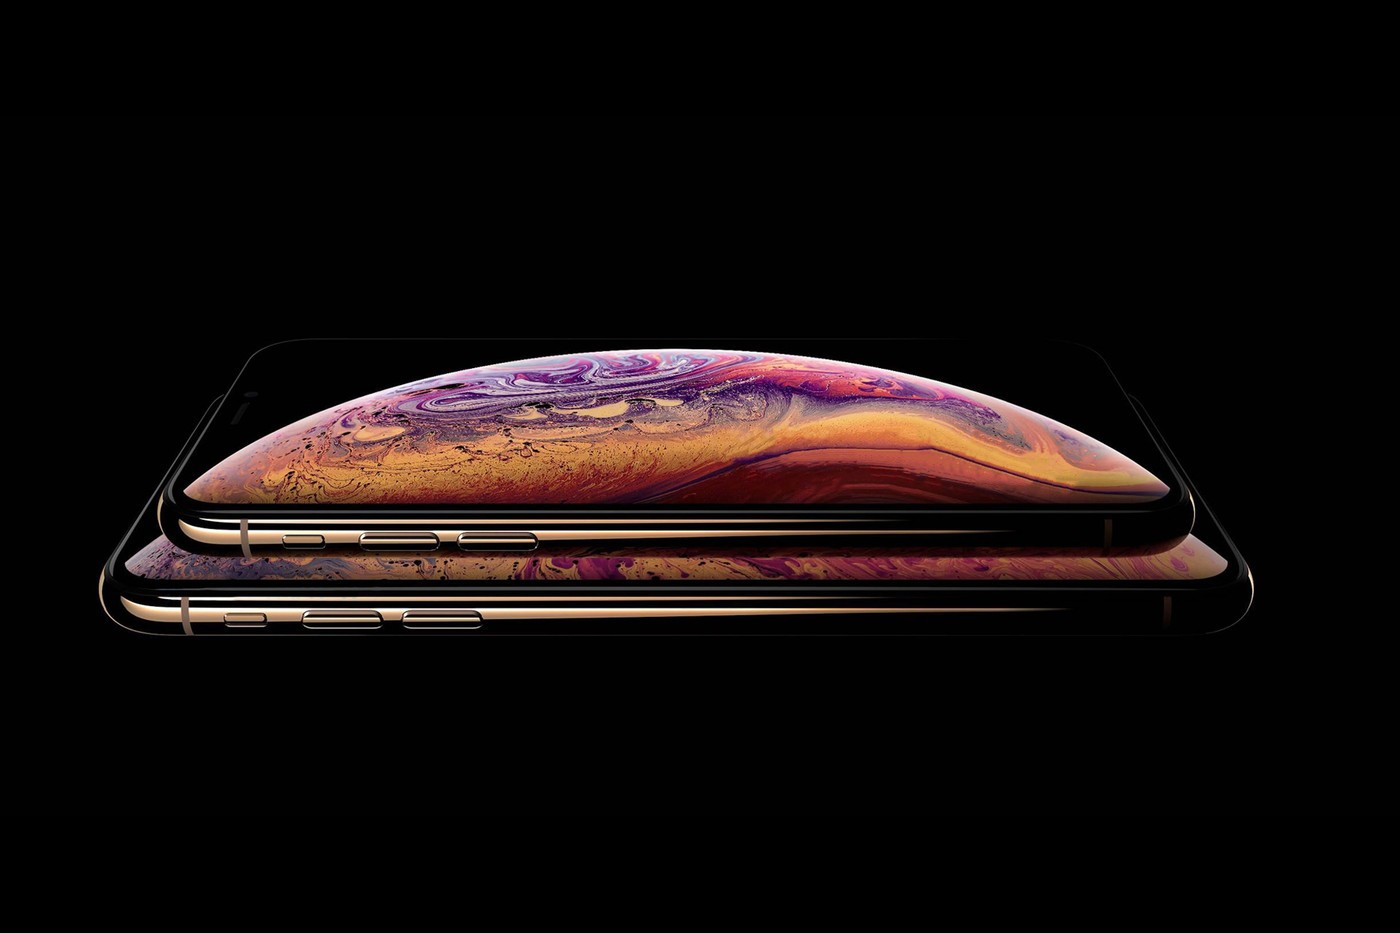 The new Apple phone – dubbed the iPhone XS – which will come in a choice of 5.8-inch and 6.5-inch organic light-emitting-diode screens and be available in a never-before-seen gold colour. Photo: 9TO5MAC/HYPEBEAST